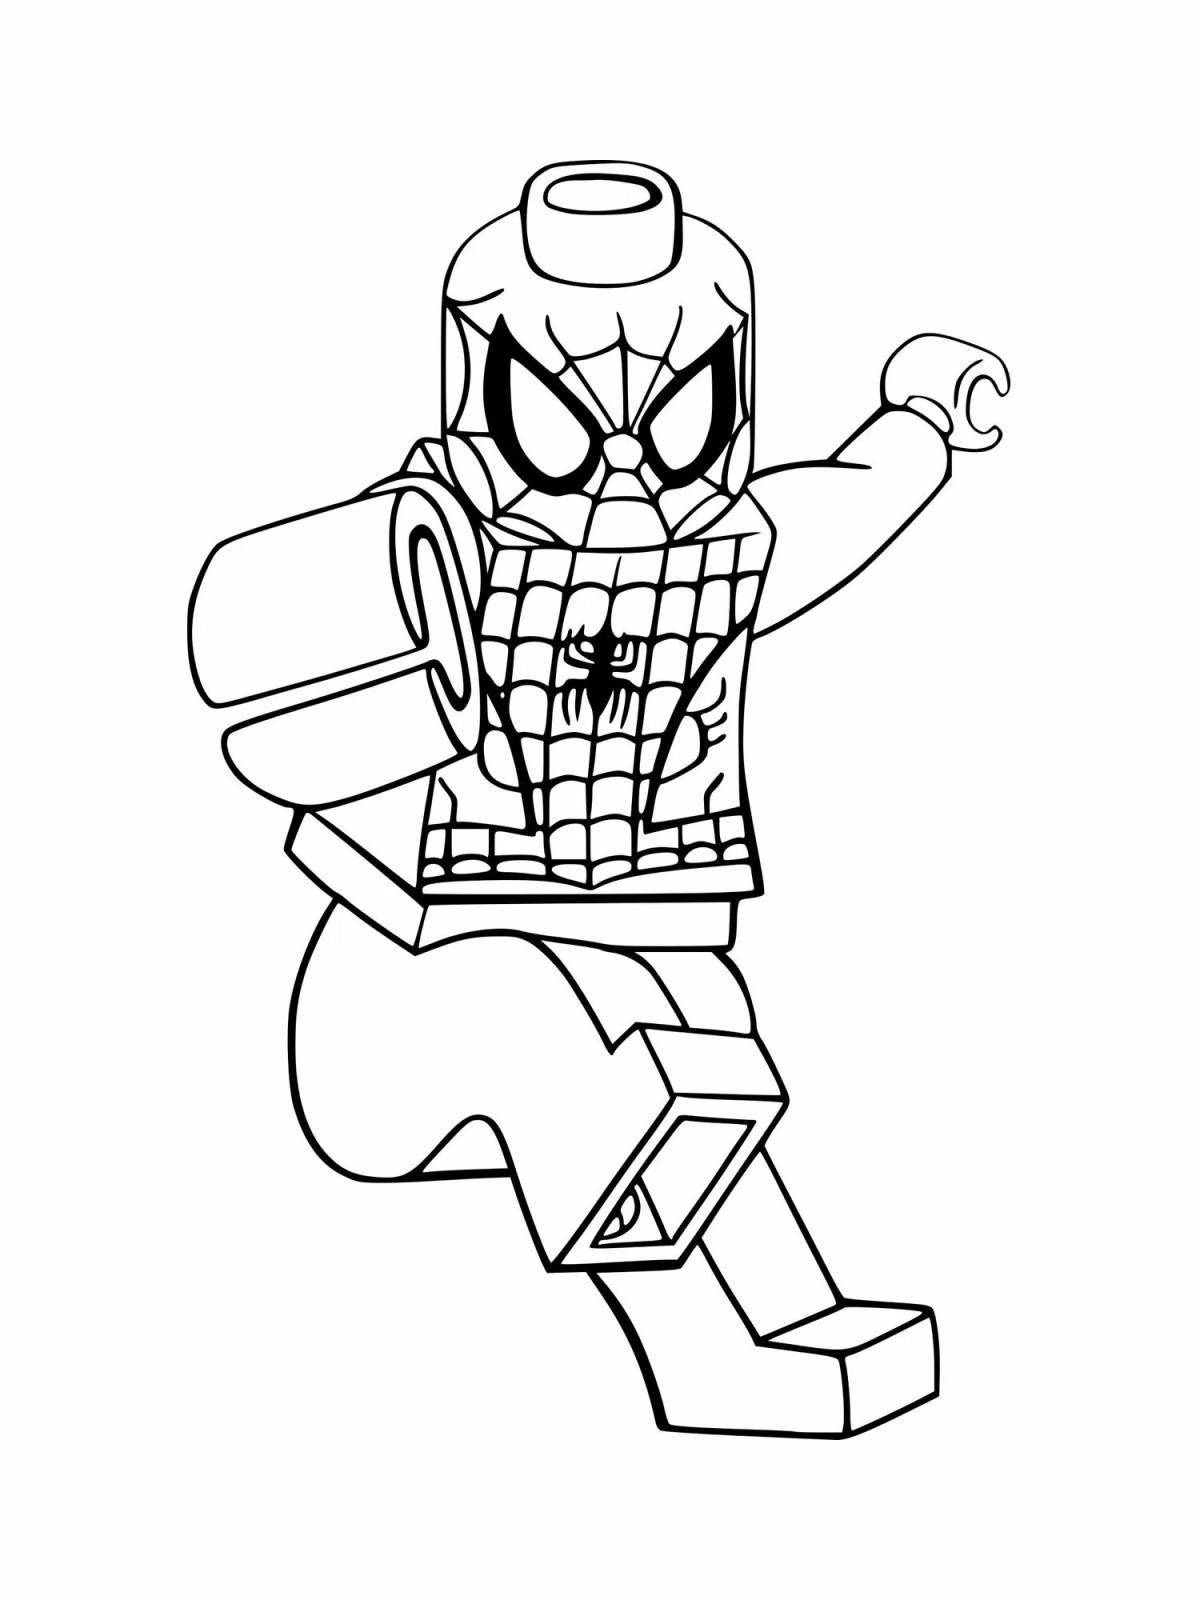 Bright lego spiderman coloring page